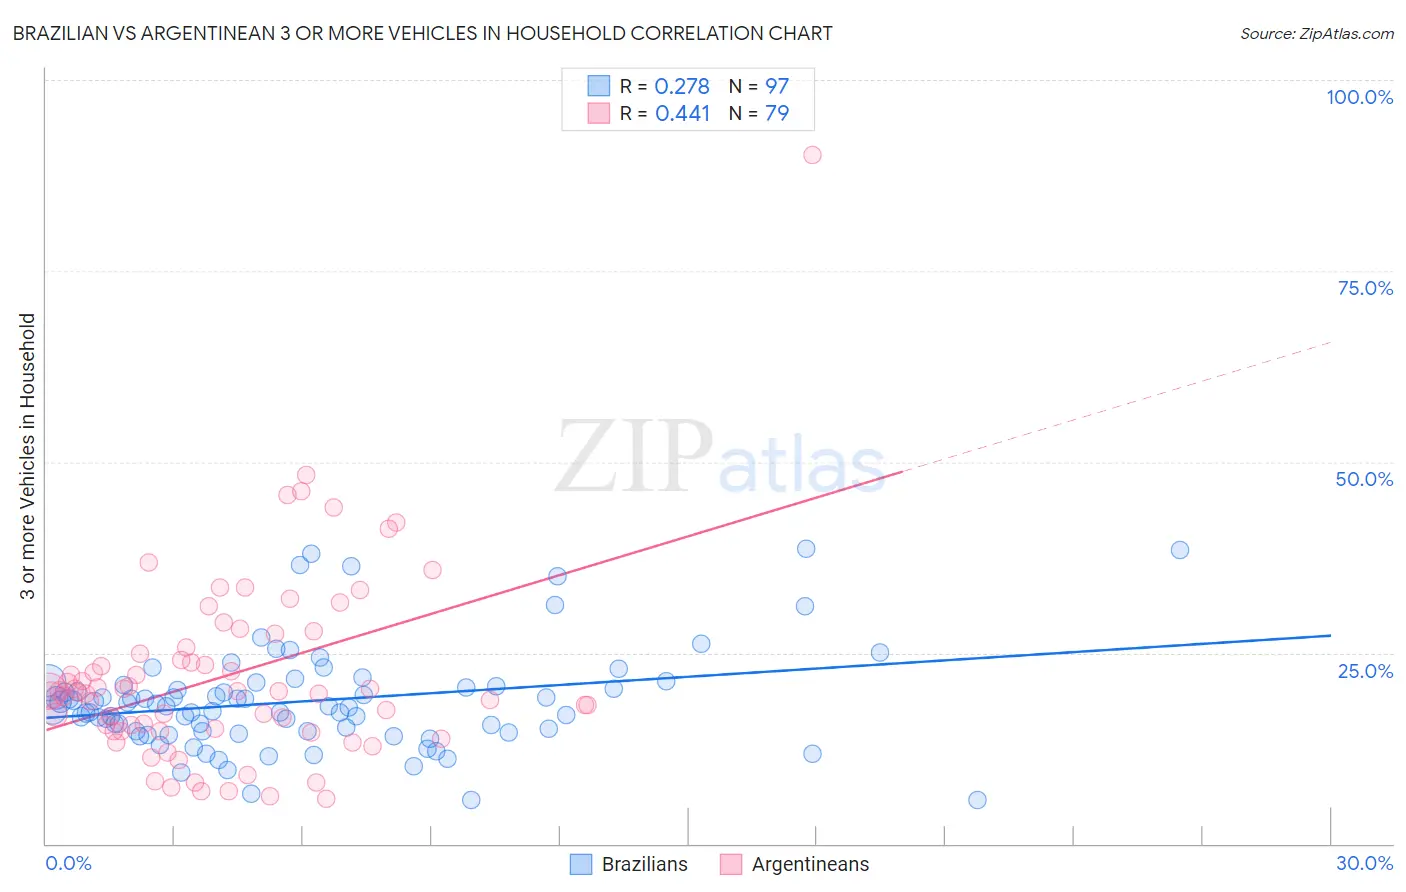 Brazilian vs Argentinean 3 or more Vehicles in Household